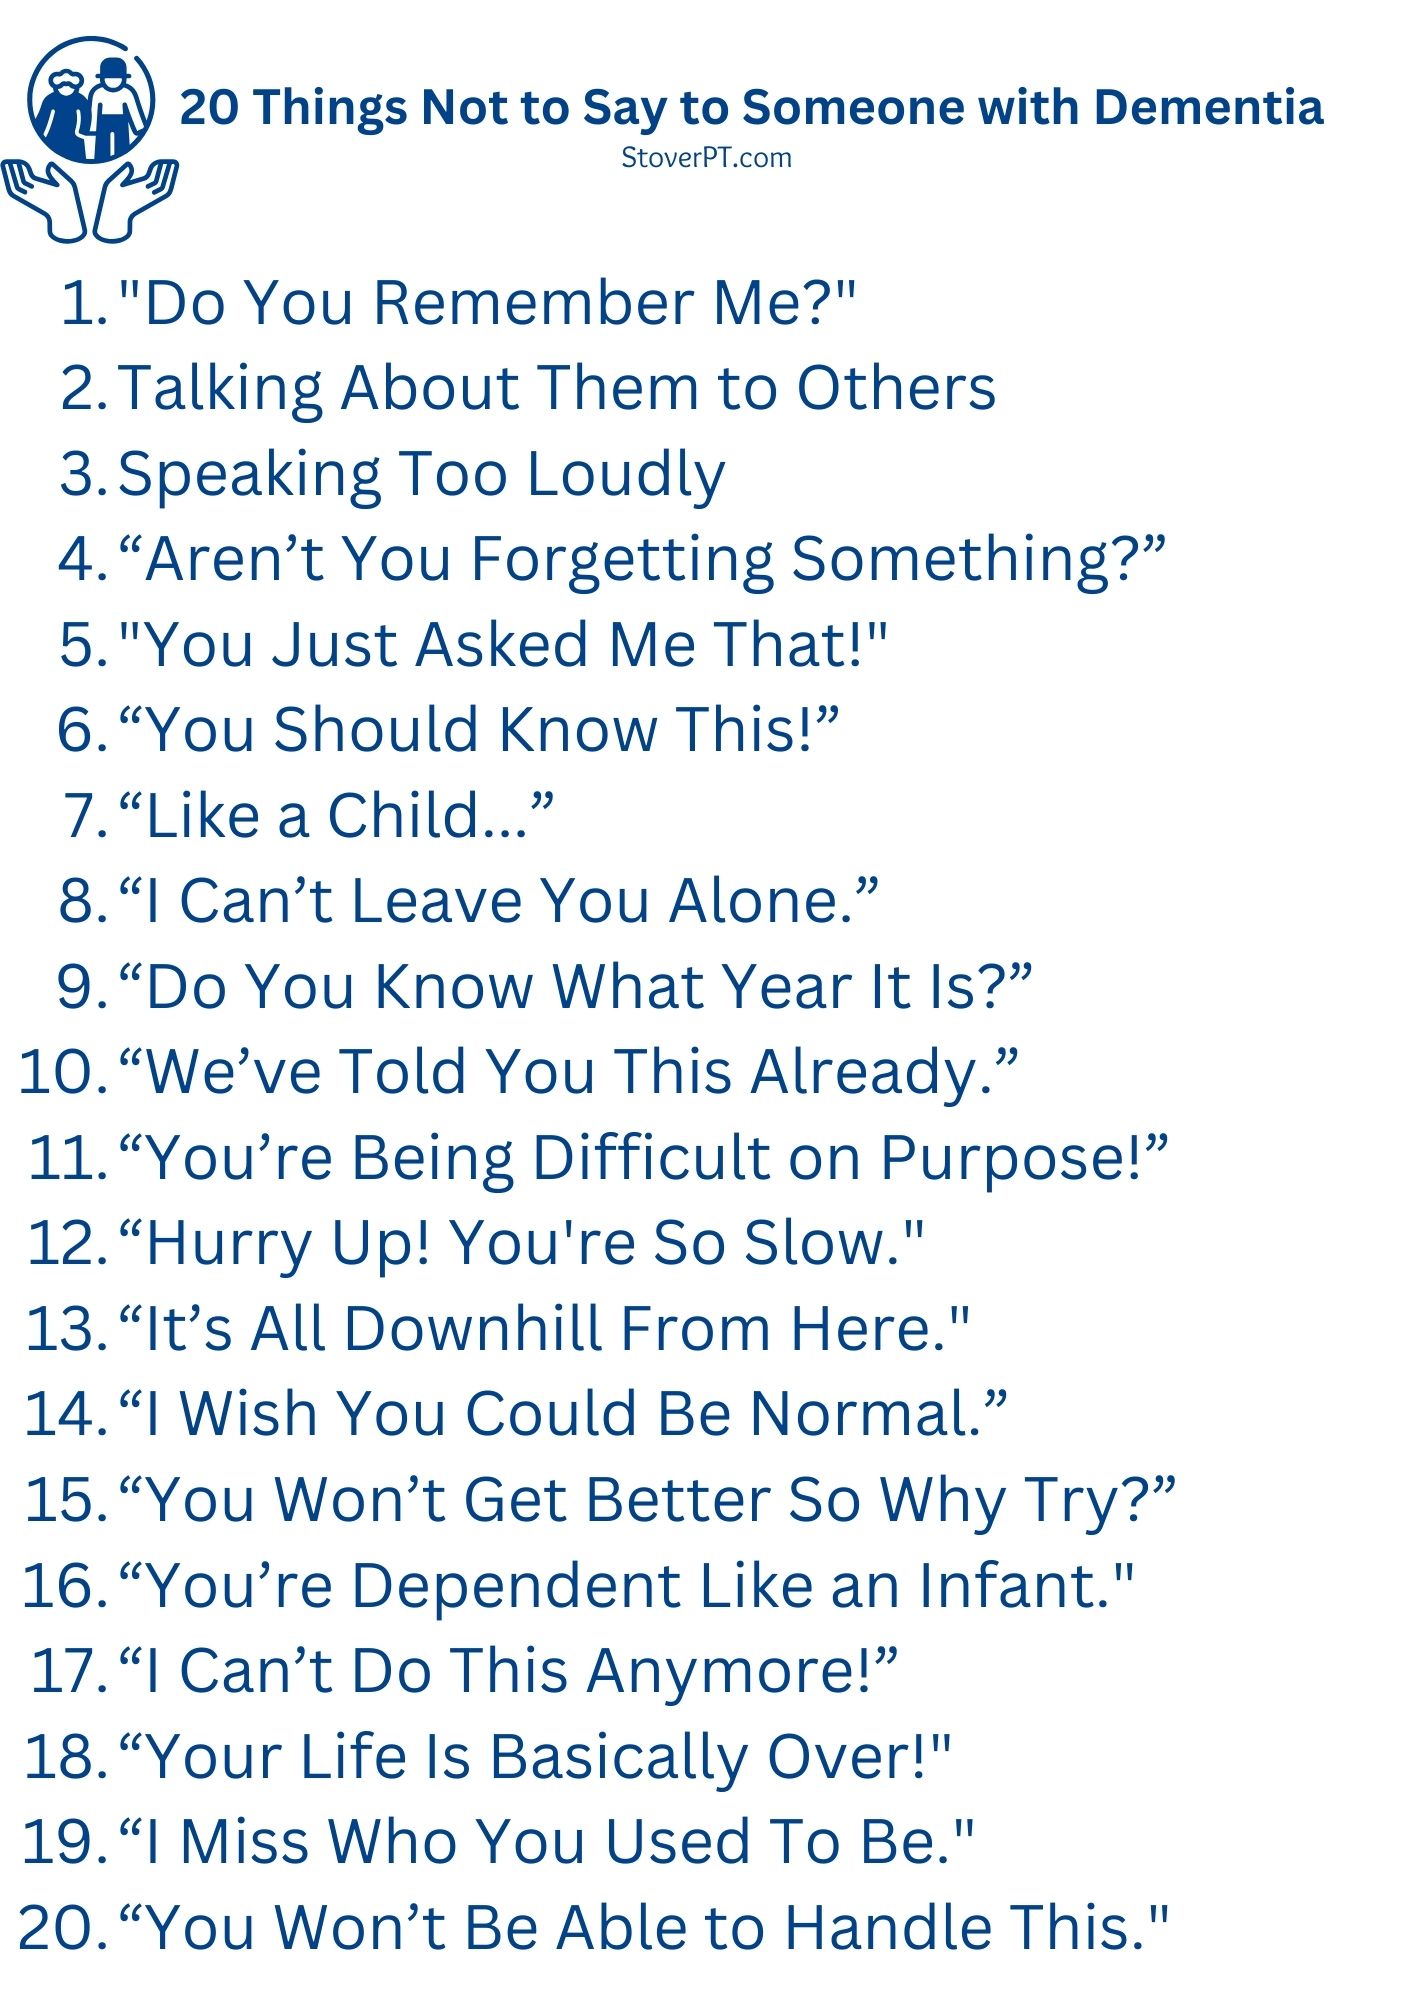 20 Things Not to Say to Someone with Dementia